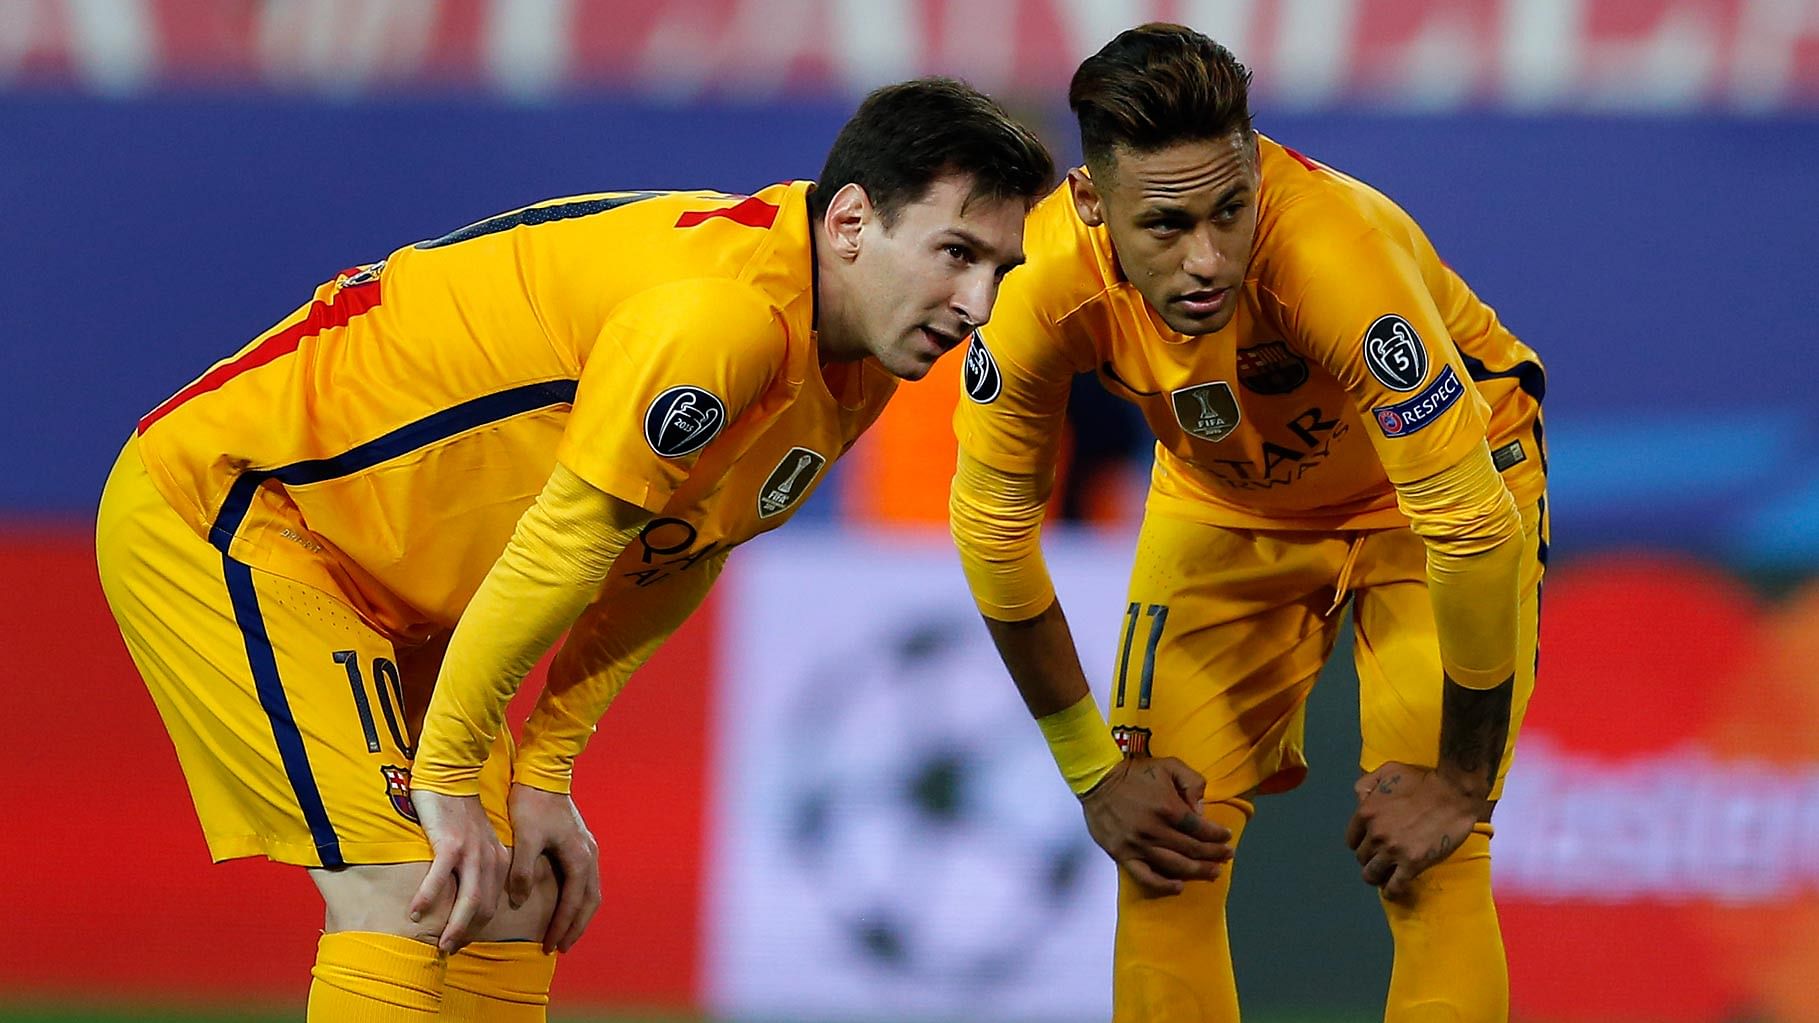 Barcelona’s Lionel Messi, left, and Neymar, right, look on during the Champions League 2nd leg quarterfinal match against Atletico Madrid. (Photo: AP)